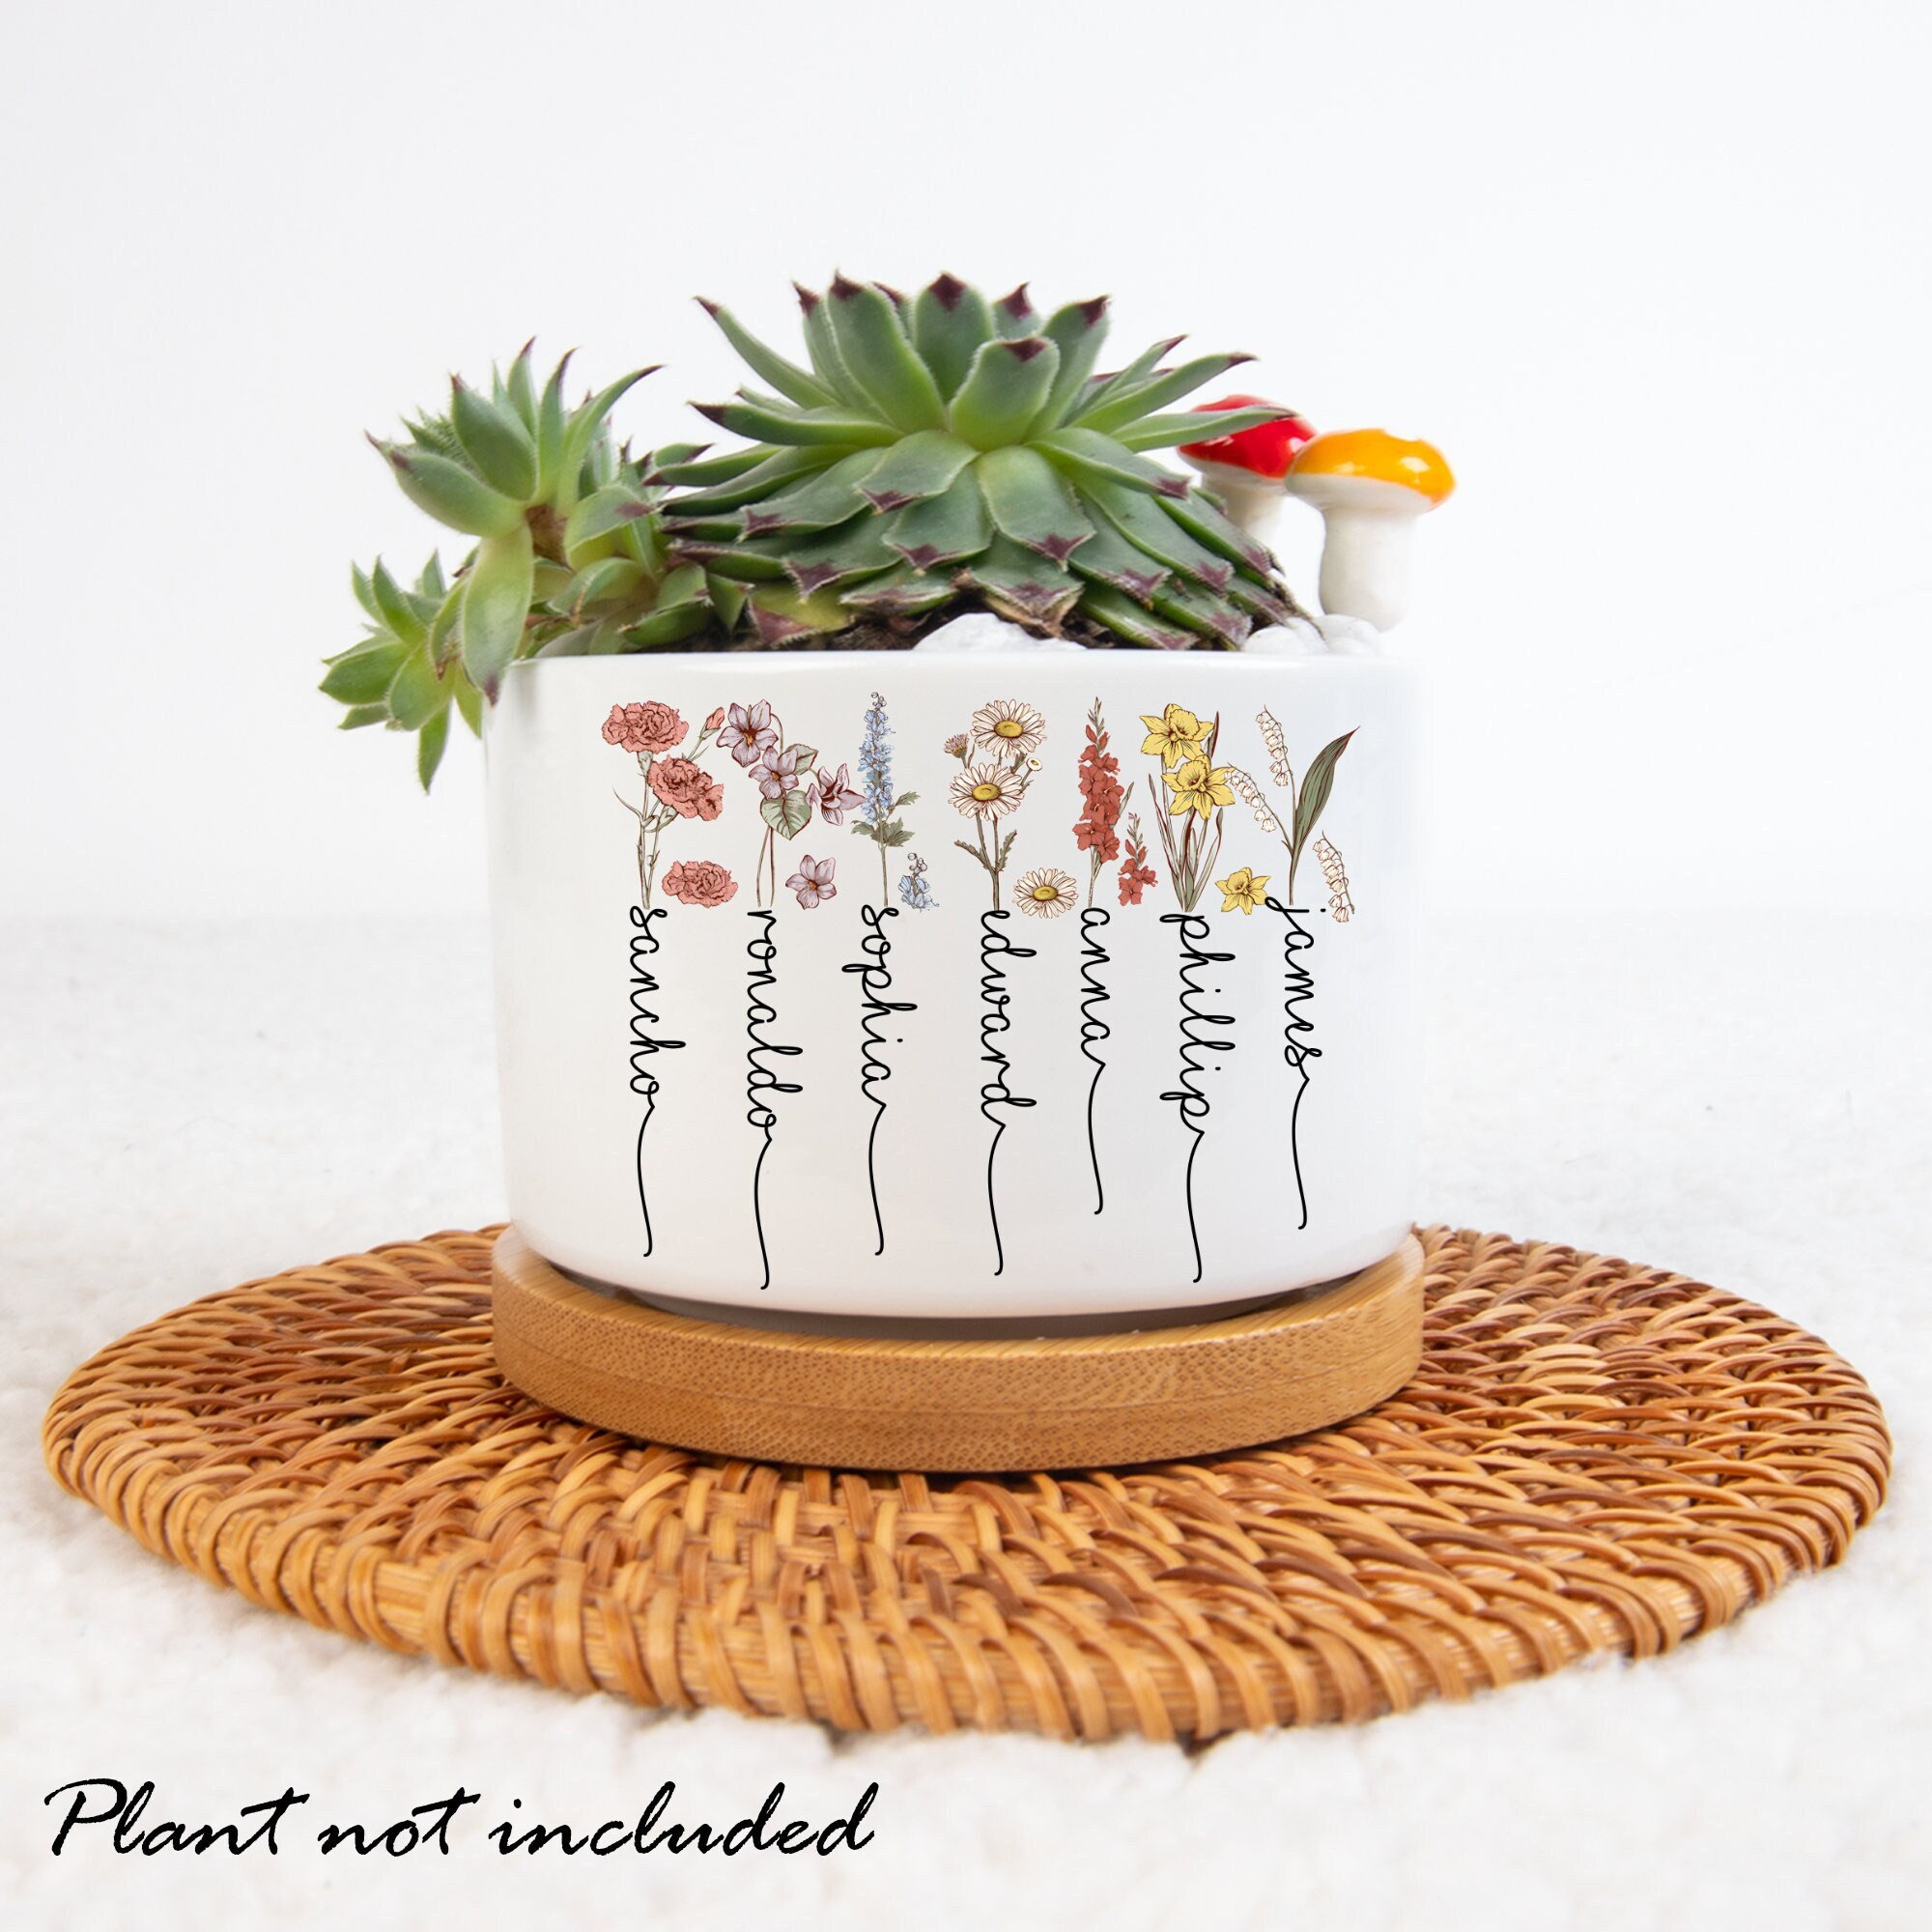 Mom Gifts “Best Mom Ever” (Small Plant/Flower Pots, Ceramic Pots)